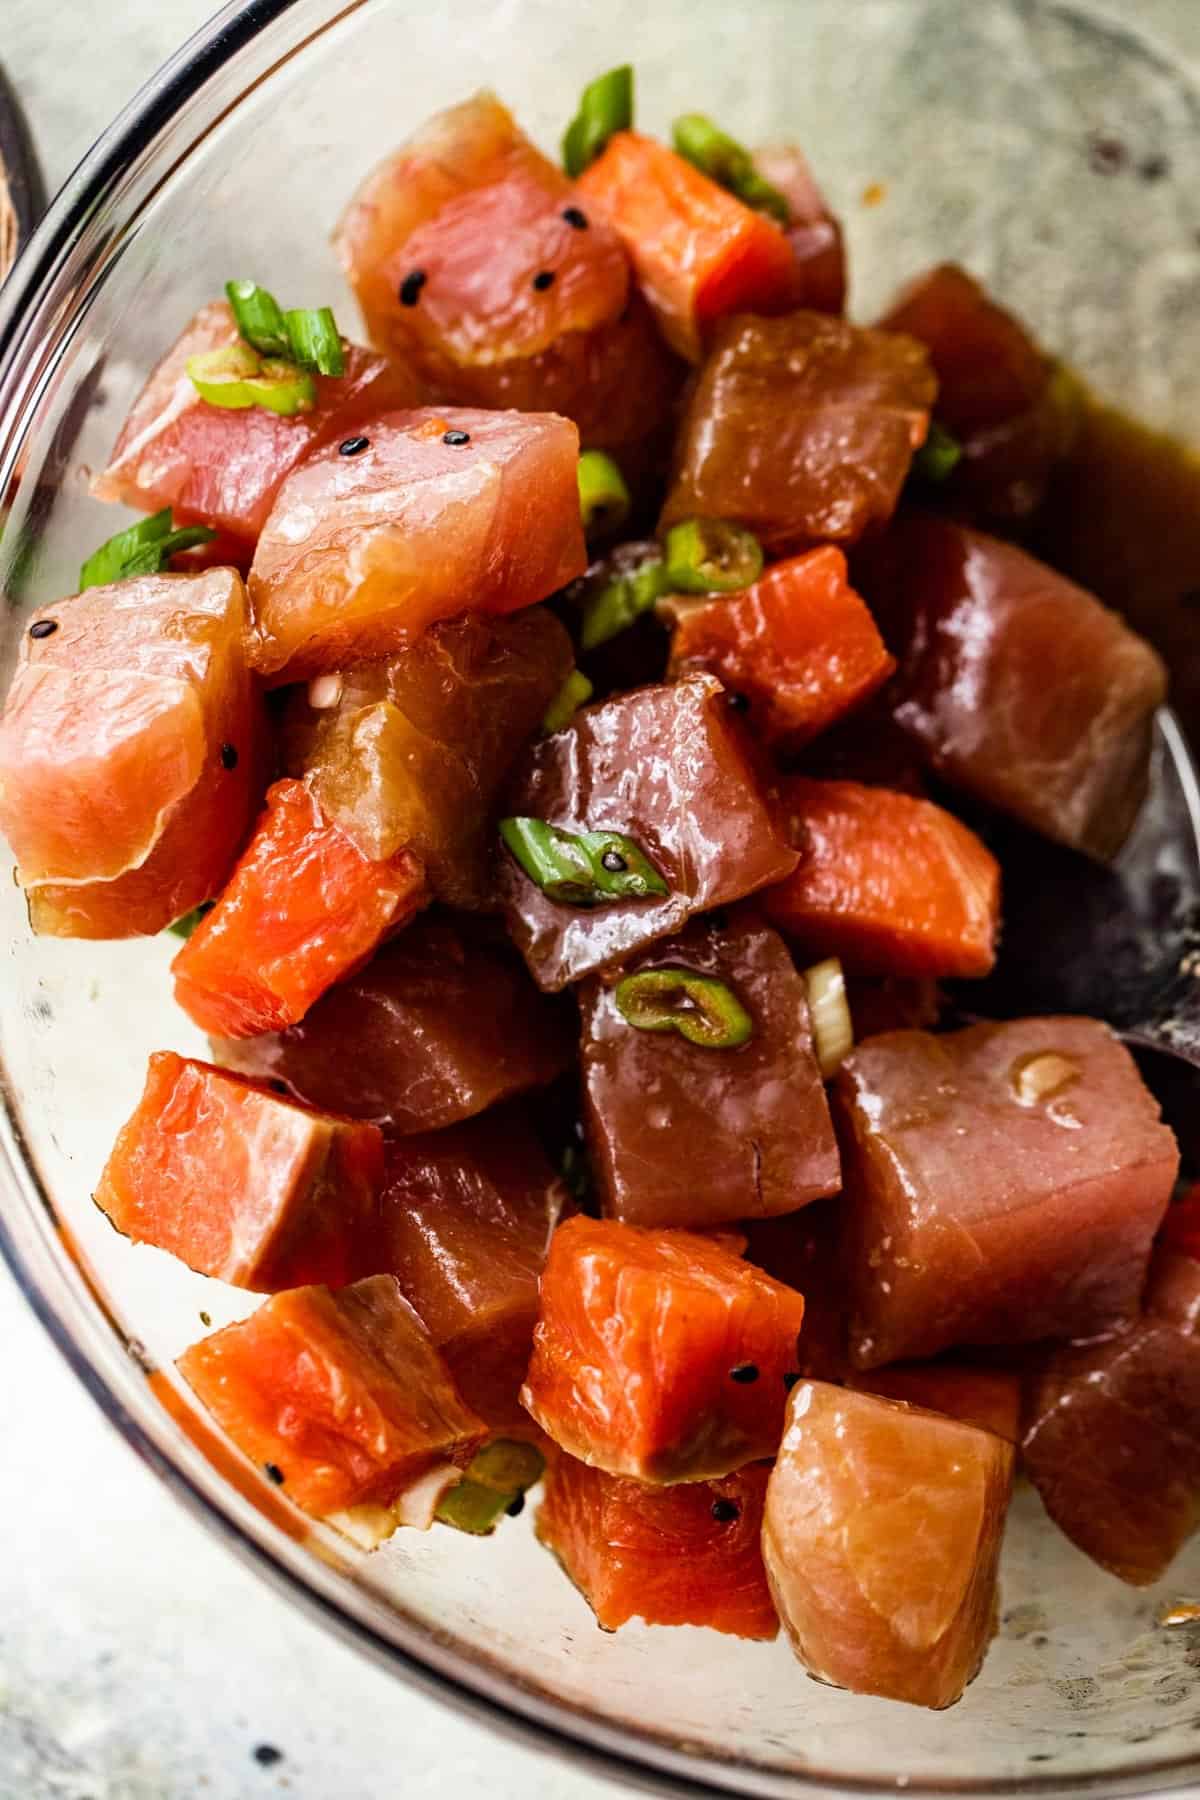 diced raw tuna and salmon in a glass bowl.